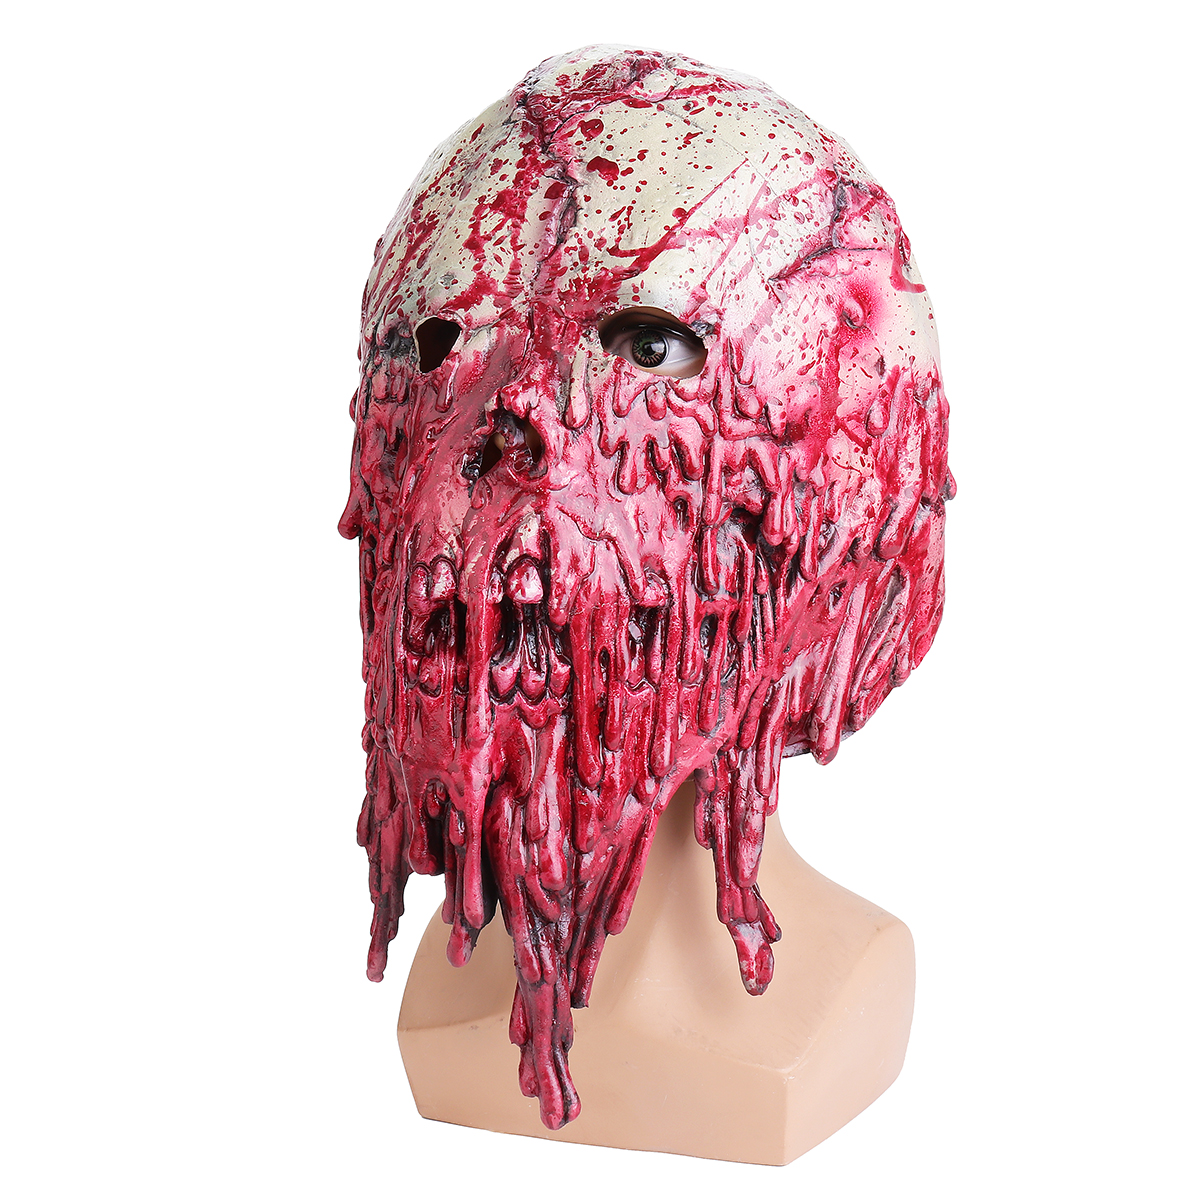 Halloween-Mask-Bloody-Festival-Skull-Zombie-Latex-Cosplay-Horror-Costume-Props-Mask-1419861-1